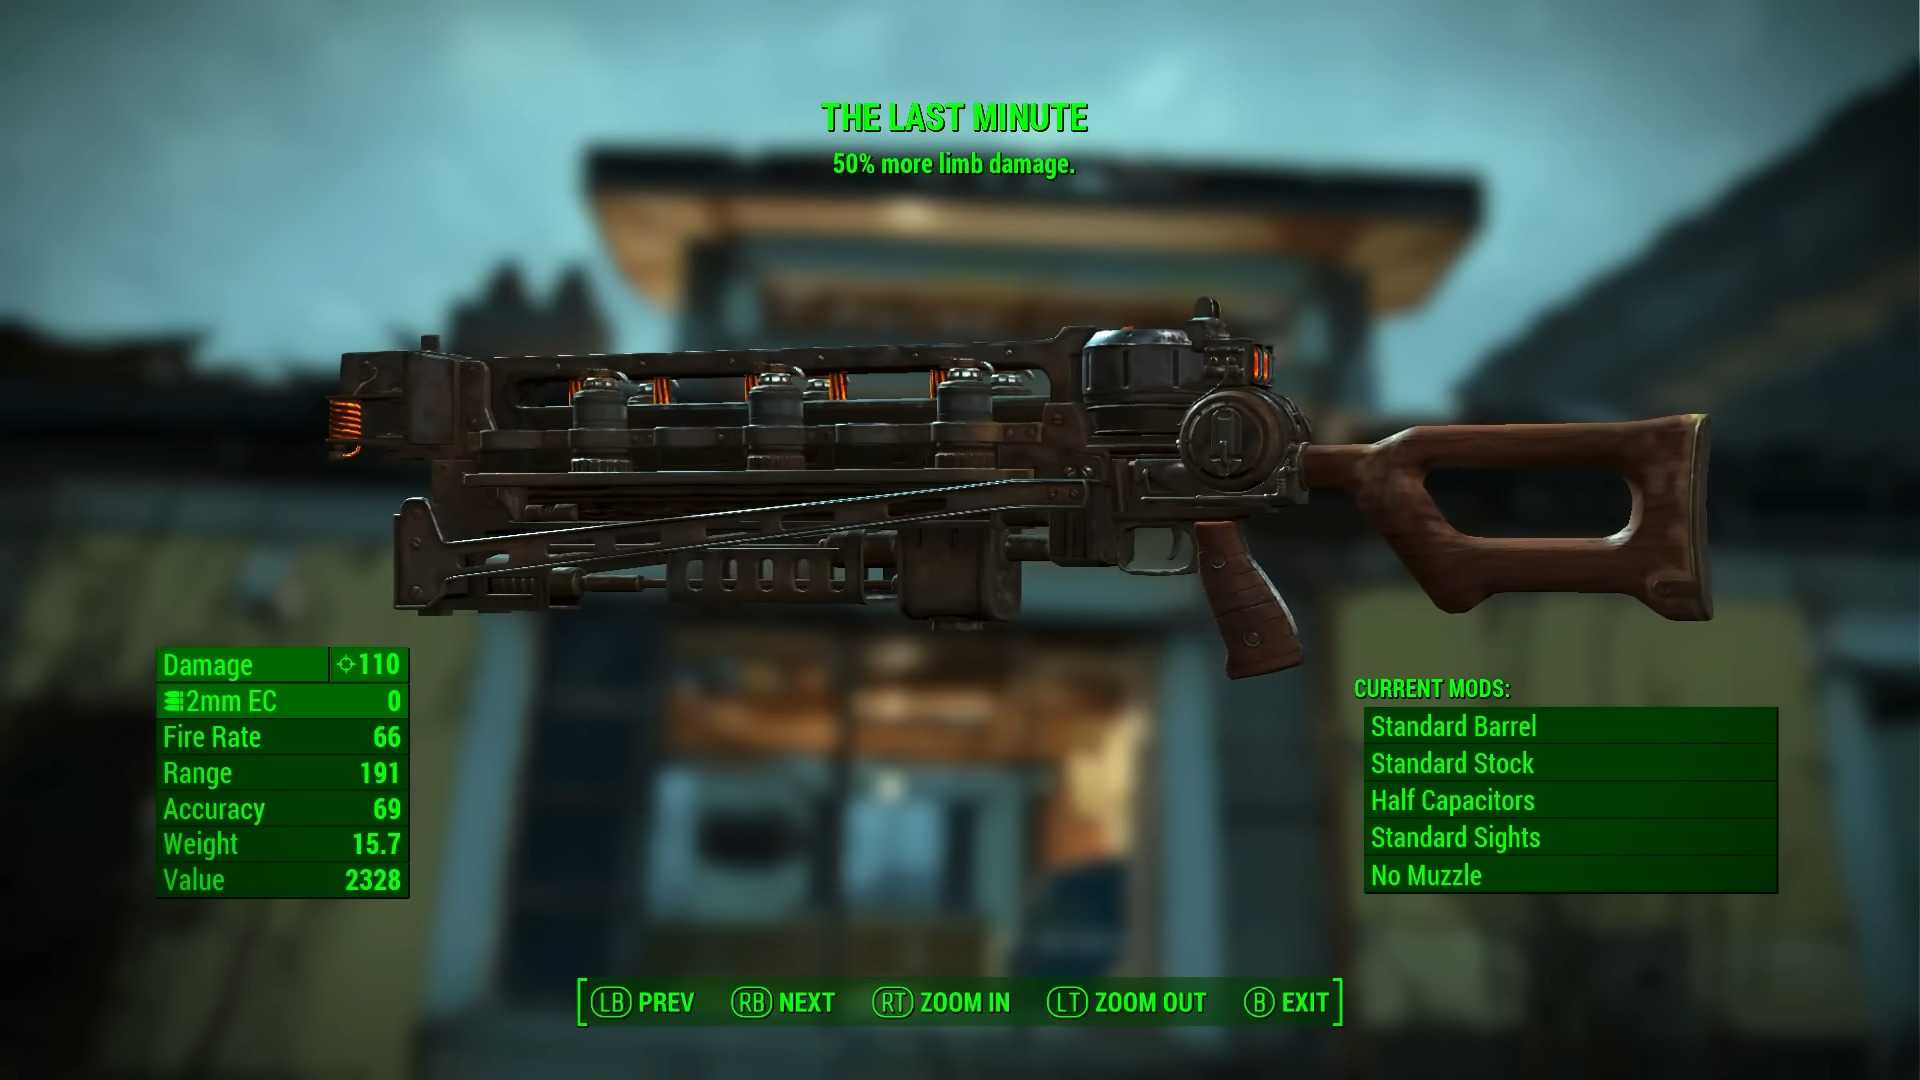 The Last Minute in Fallout 4